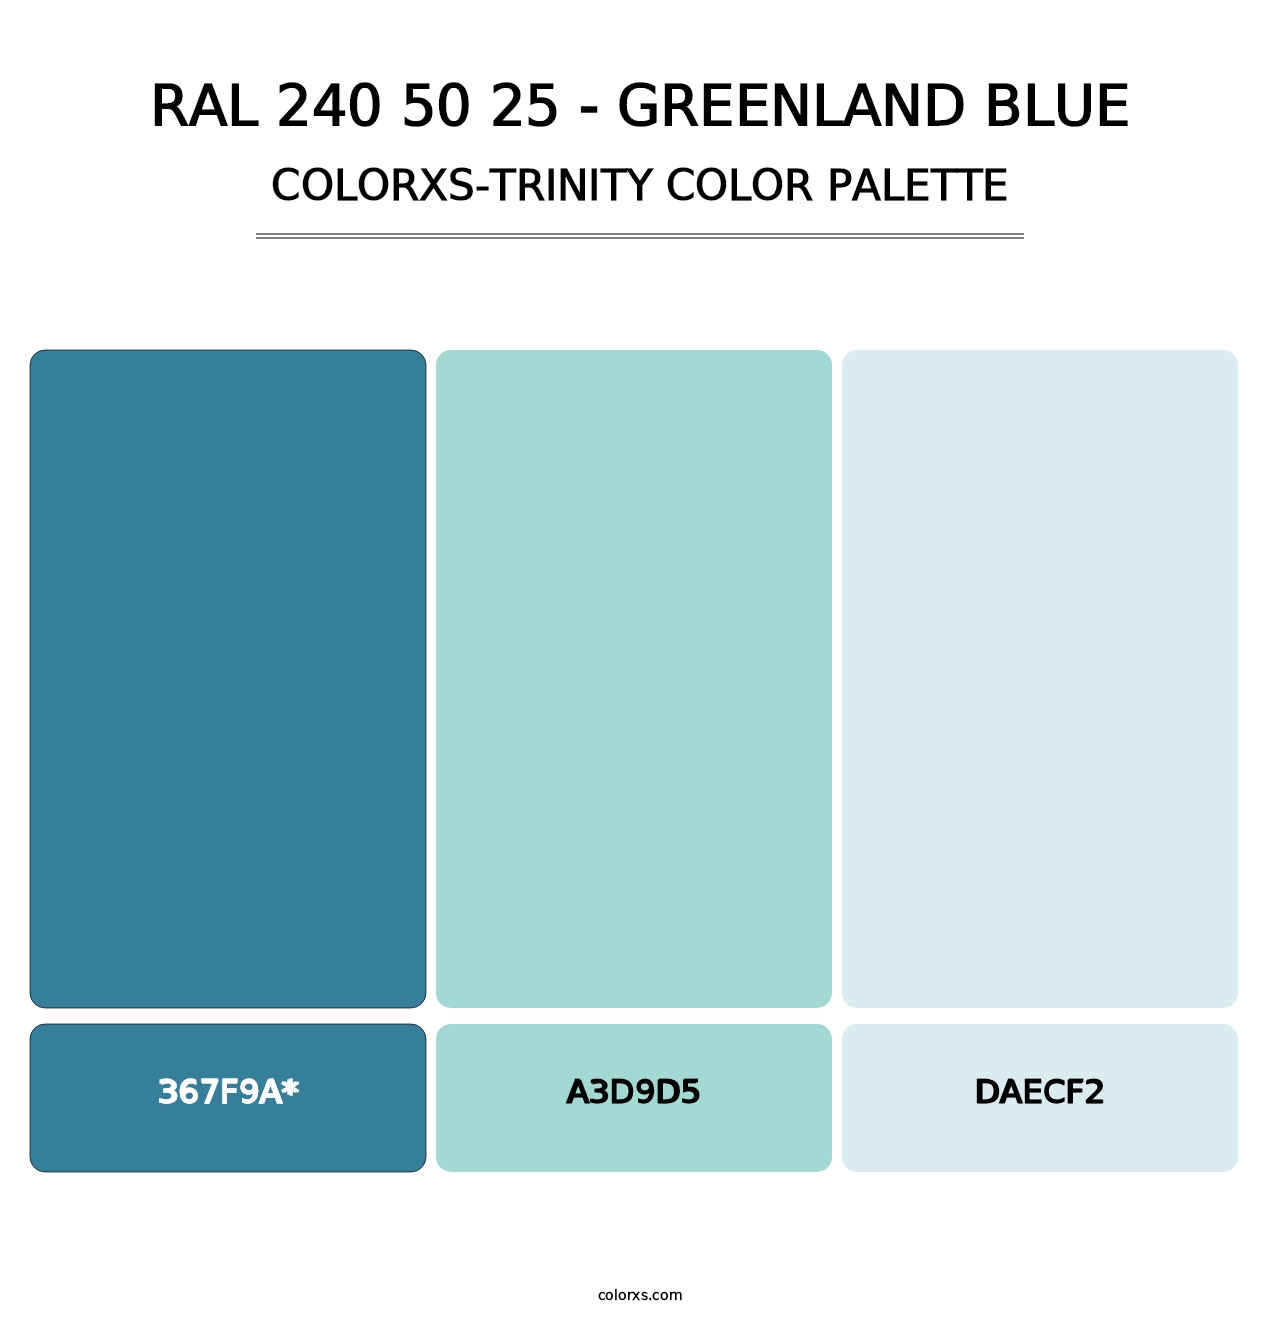 RAL 240 50 25 - Greenland Blue - Colorxs Trinity Palette